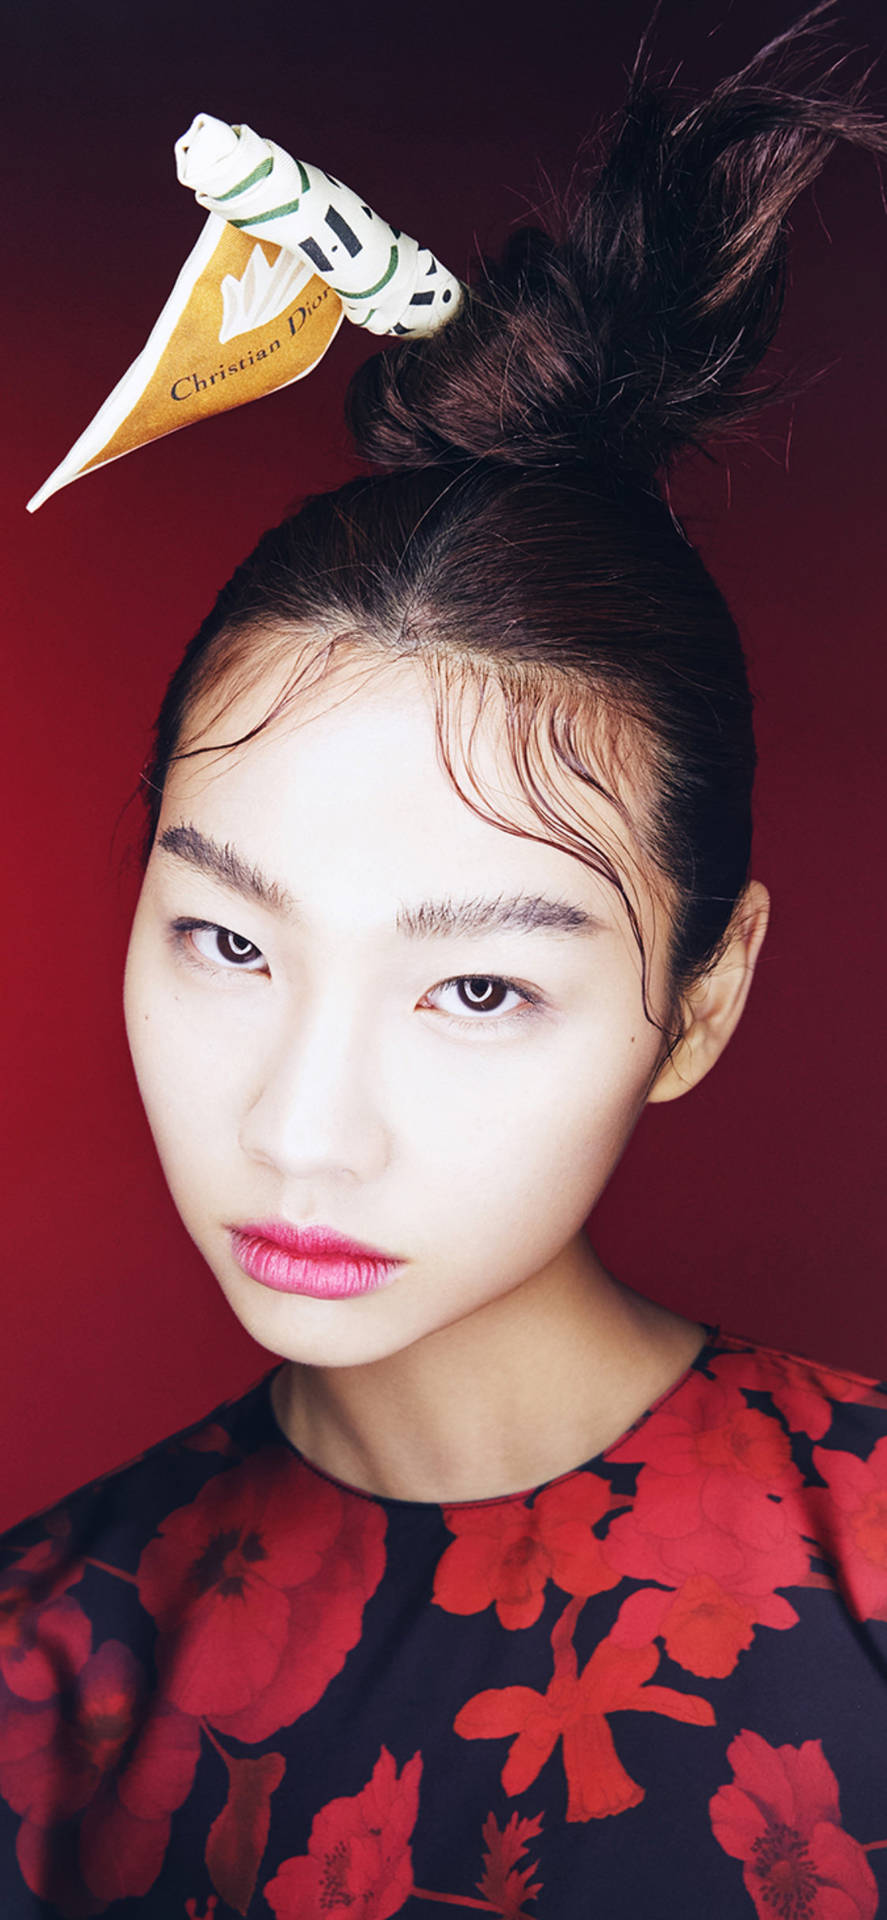 Jung Ho Yeon displays her chic stunning beauty in the Louis